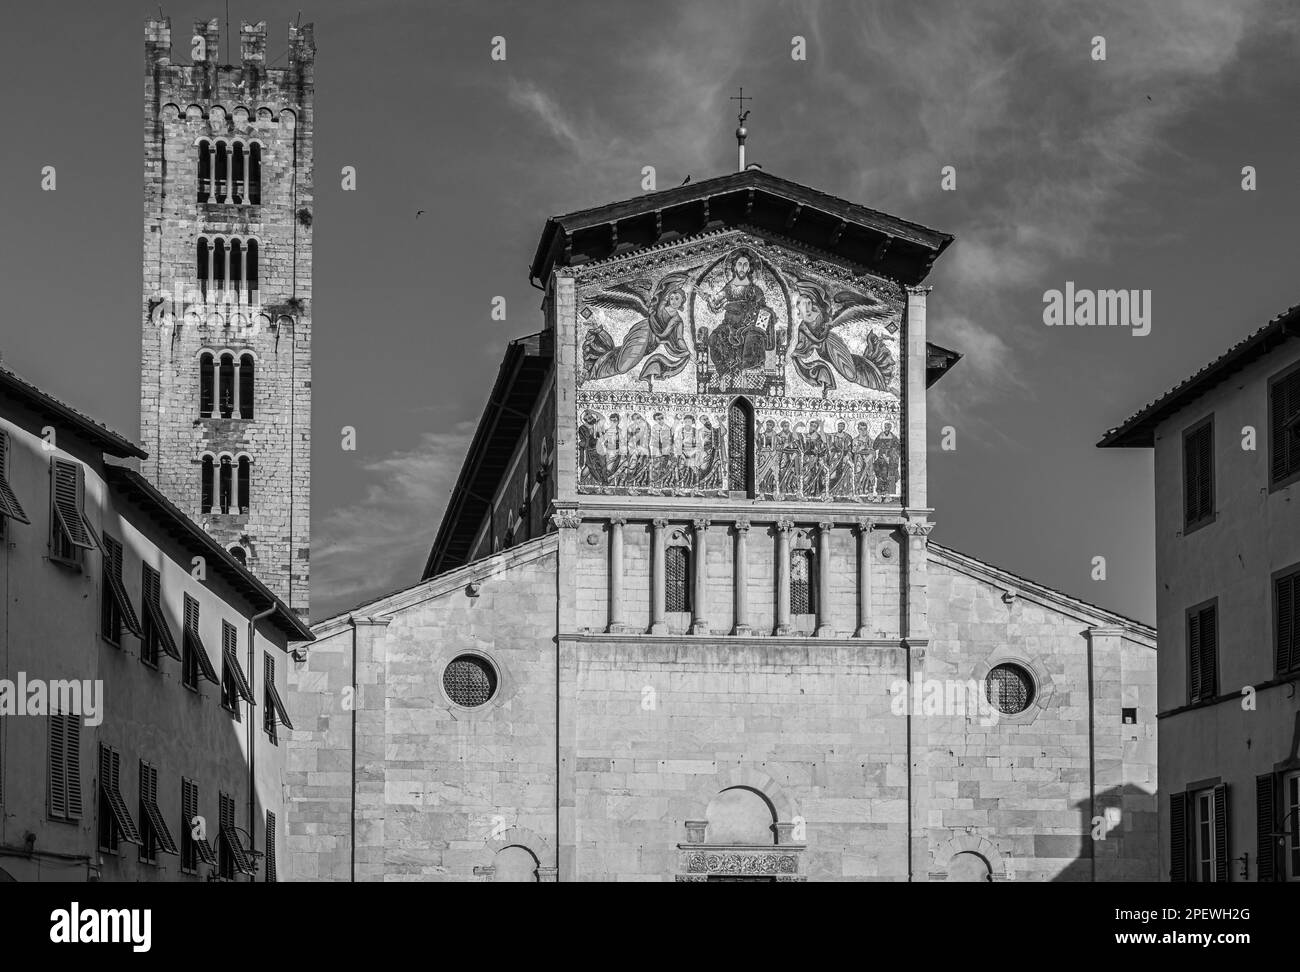 Lucca italy Black and White Stock Photos & Images - Alamy